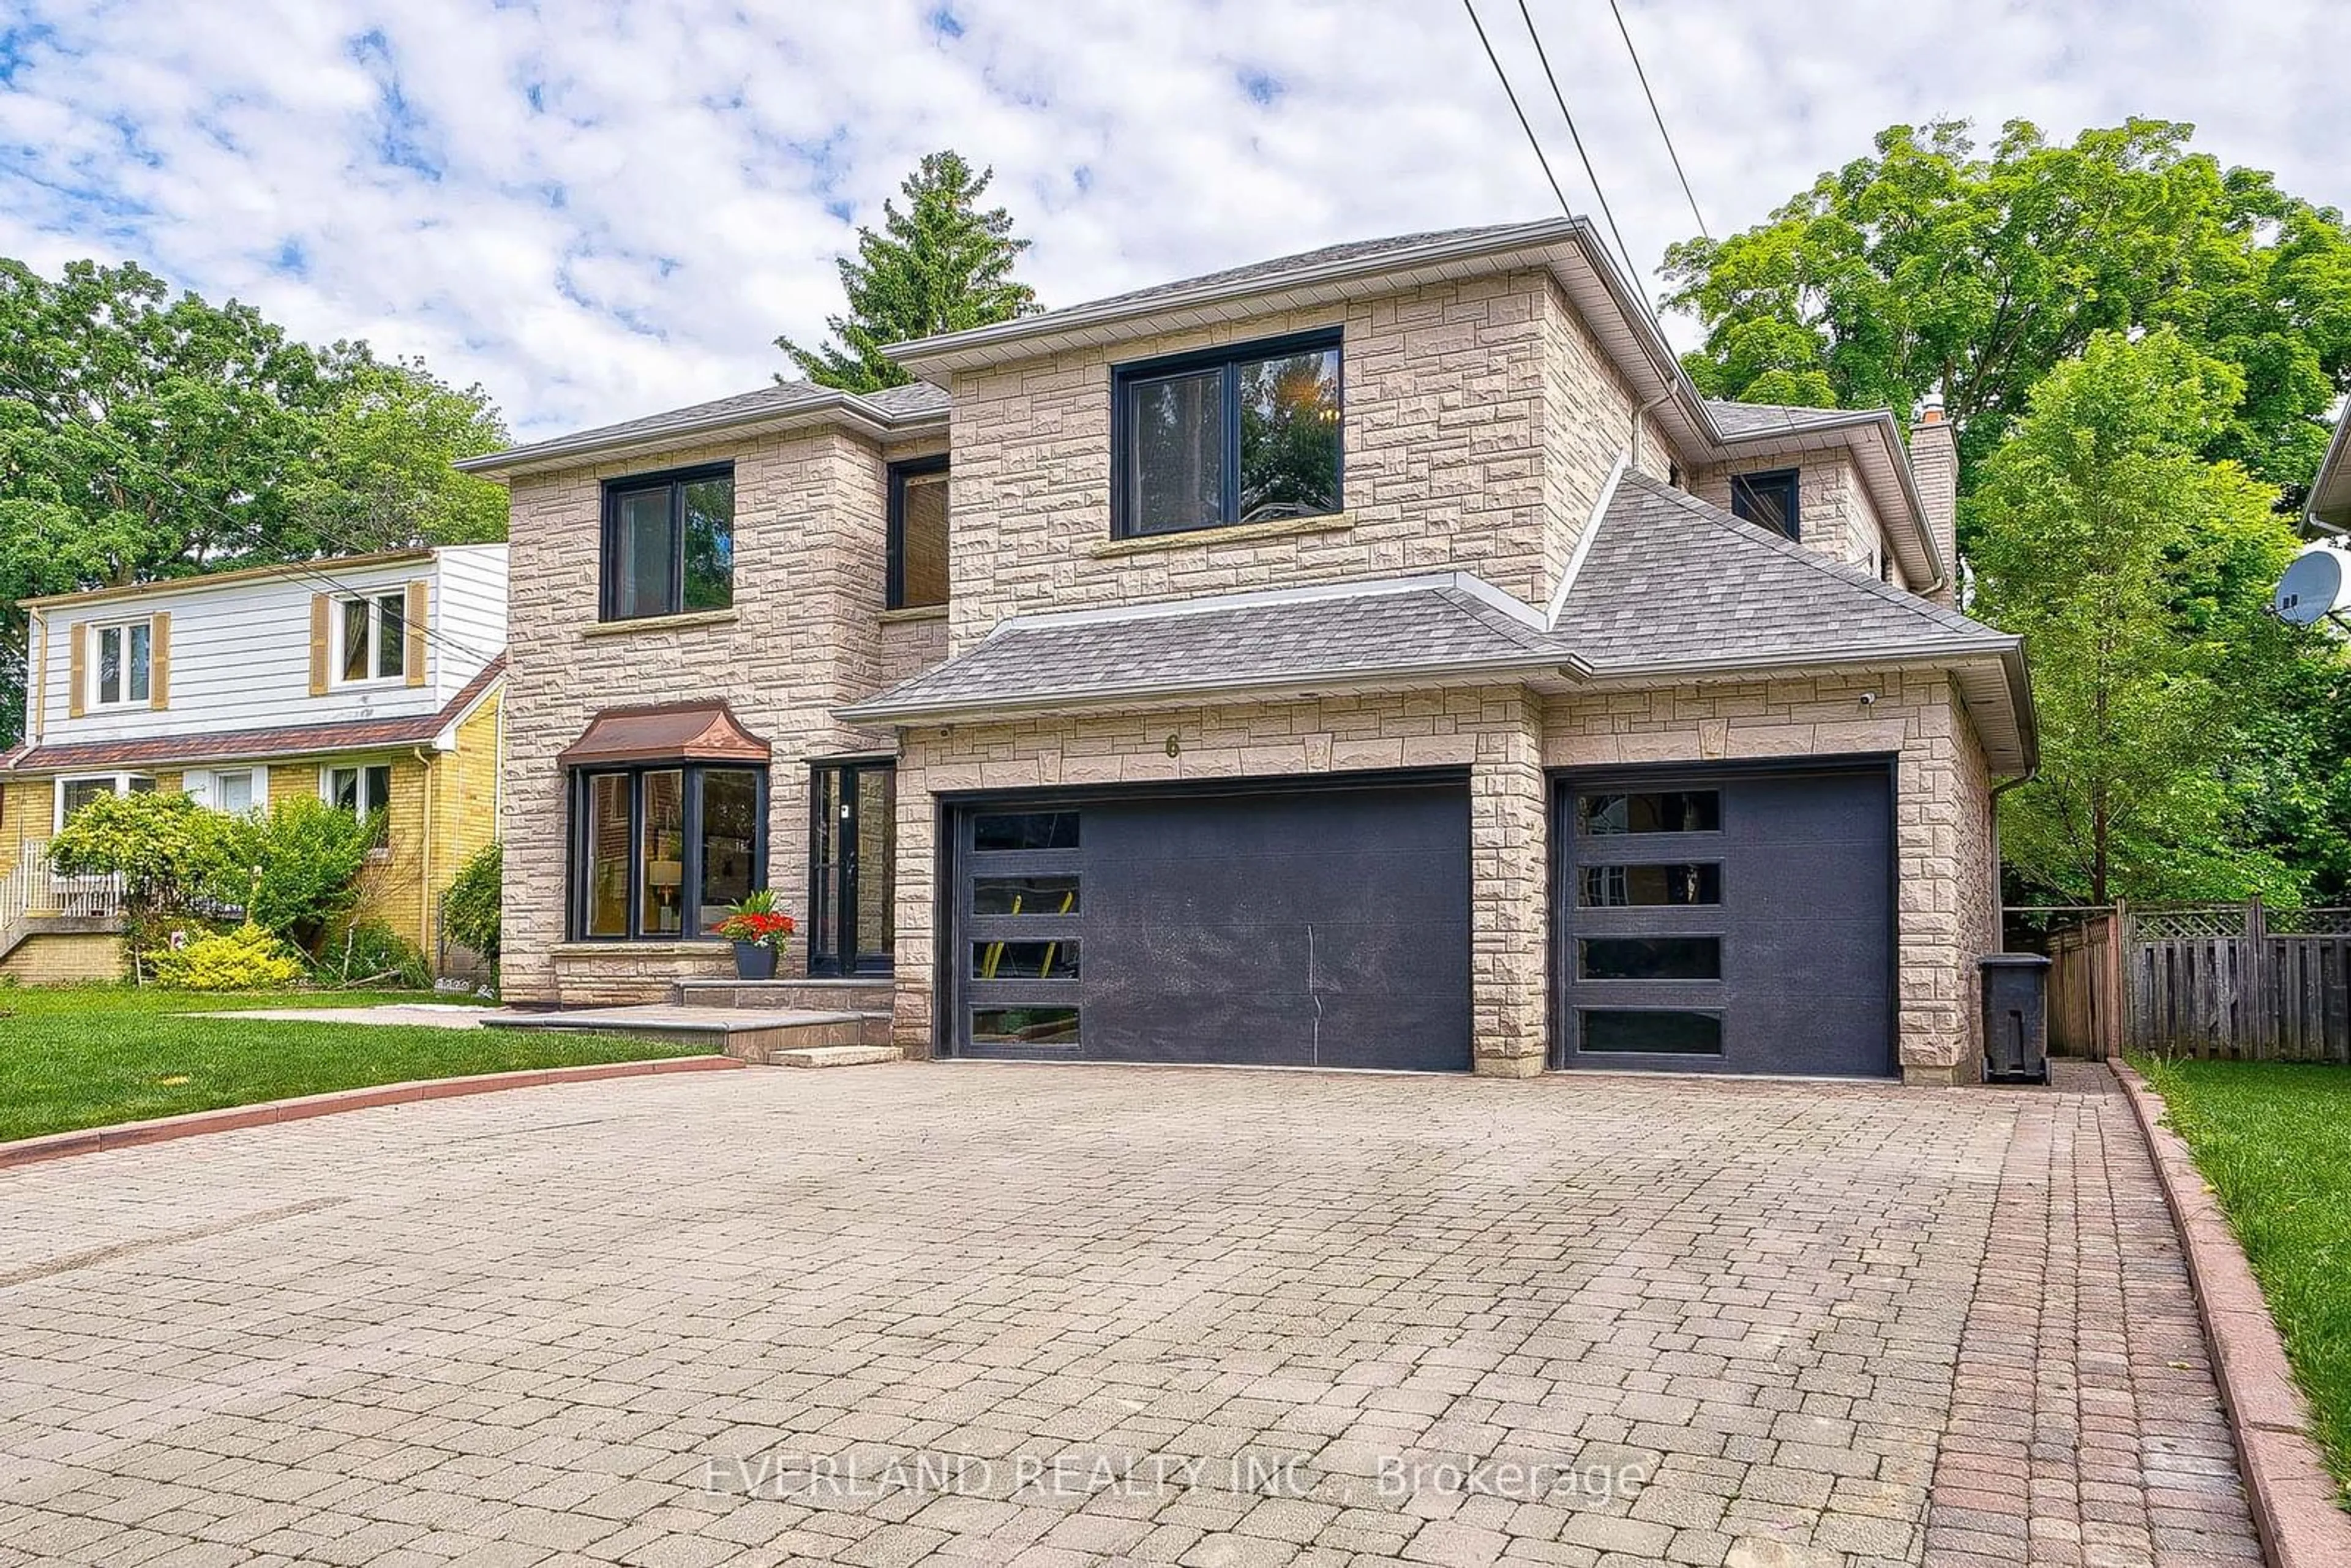 Home with brick exterior material for 6 Lailey Cres, Toronto Ontario M2N 4G9